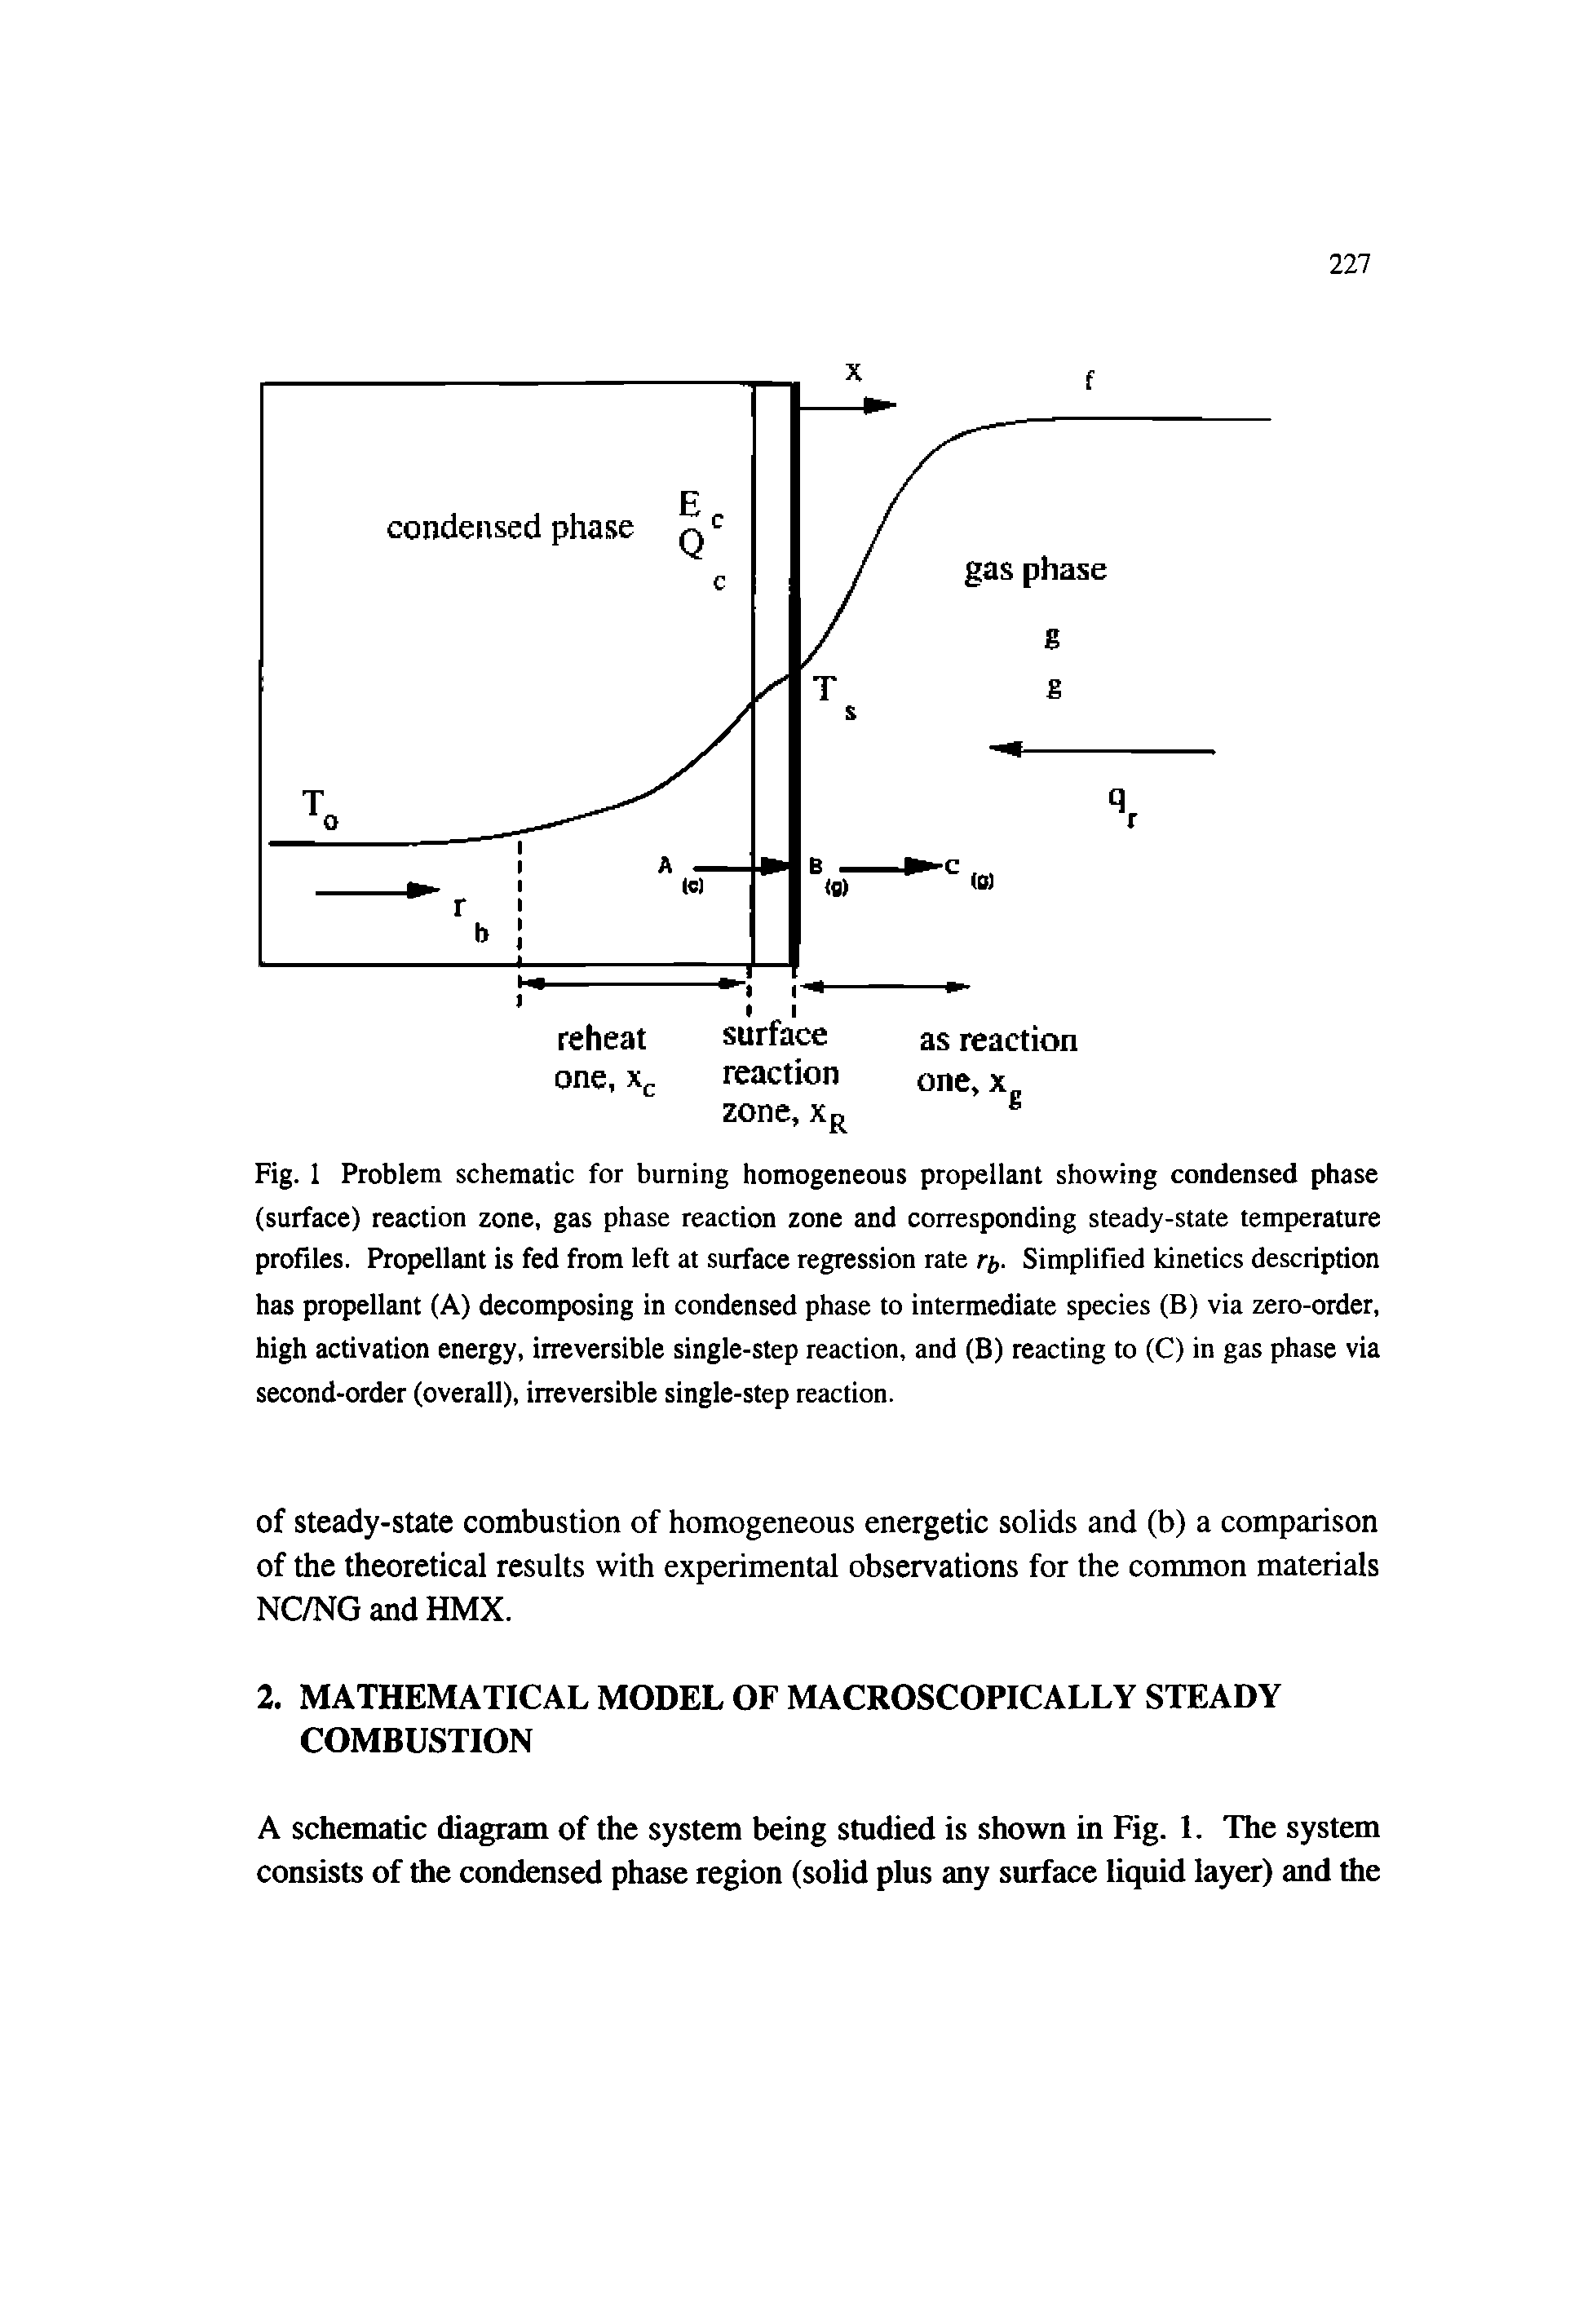 Fig. 1 Problem schematic for burning homogeneous propellant showing condensed phase (surface) reaction zone, gas phase reaction zone and corresponding steady-state temperature profiles. Propellant is fed from left at surface regression rate r. Simplified kinetics description has propellant (A) decomposing in condensed phase to intermediate species (B) via zero-order, high activation energy, irreversible single-step reaction, and (B) reacting to (C) in gas phase via second-order (overall), irreversible single-step reaction.